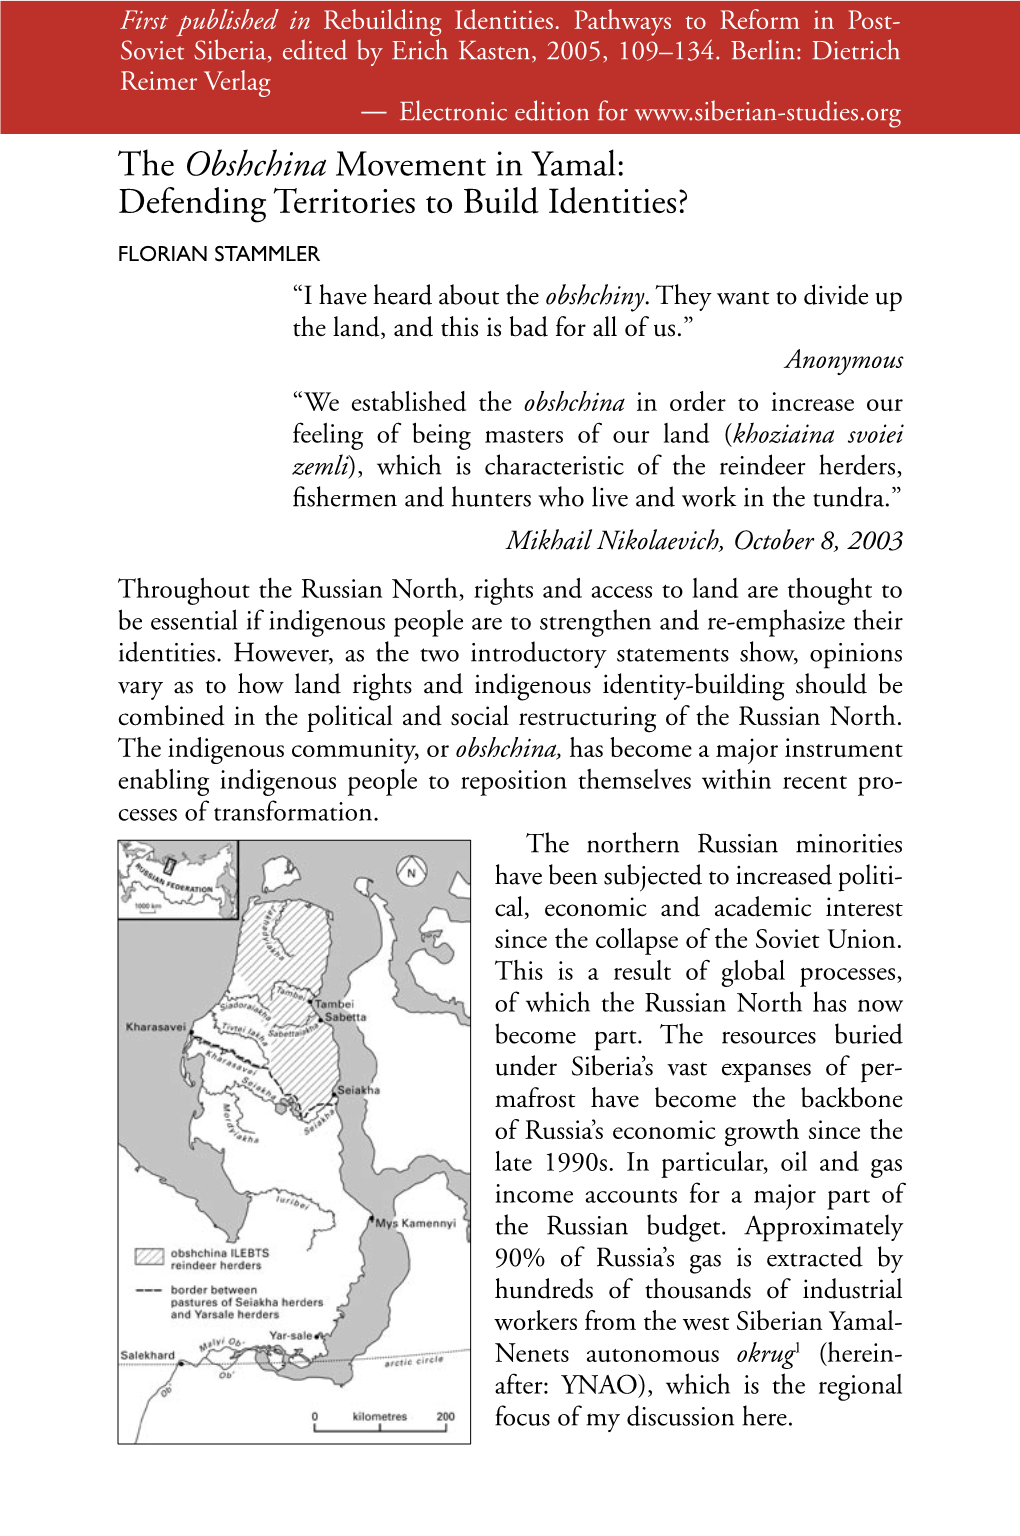 The Obshchina Movement in Yamal: Defending Territories to Build Identities?